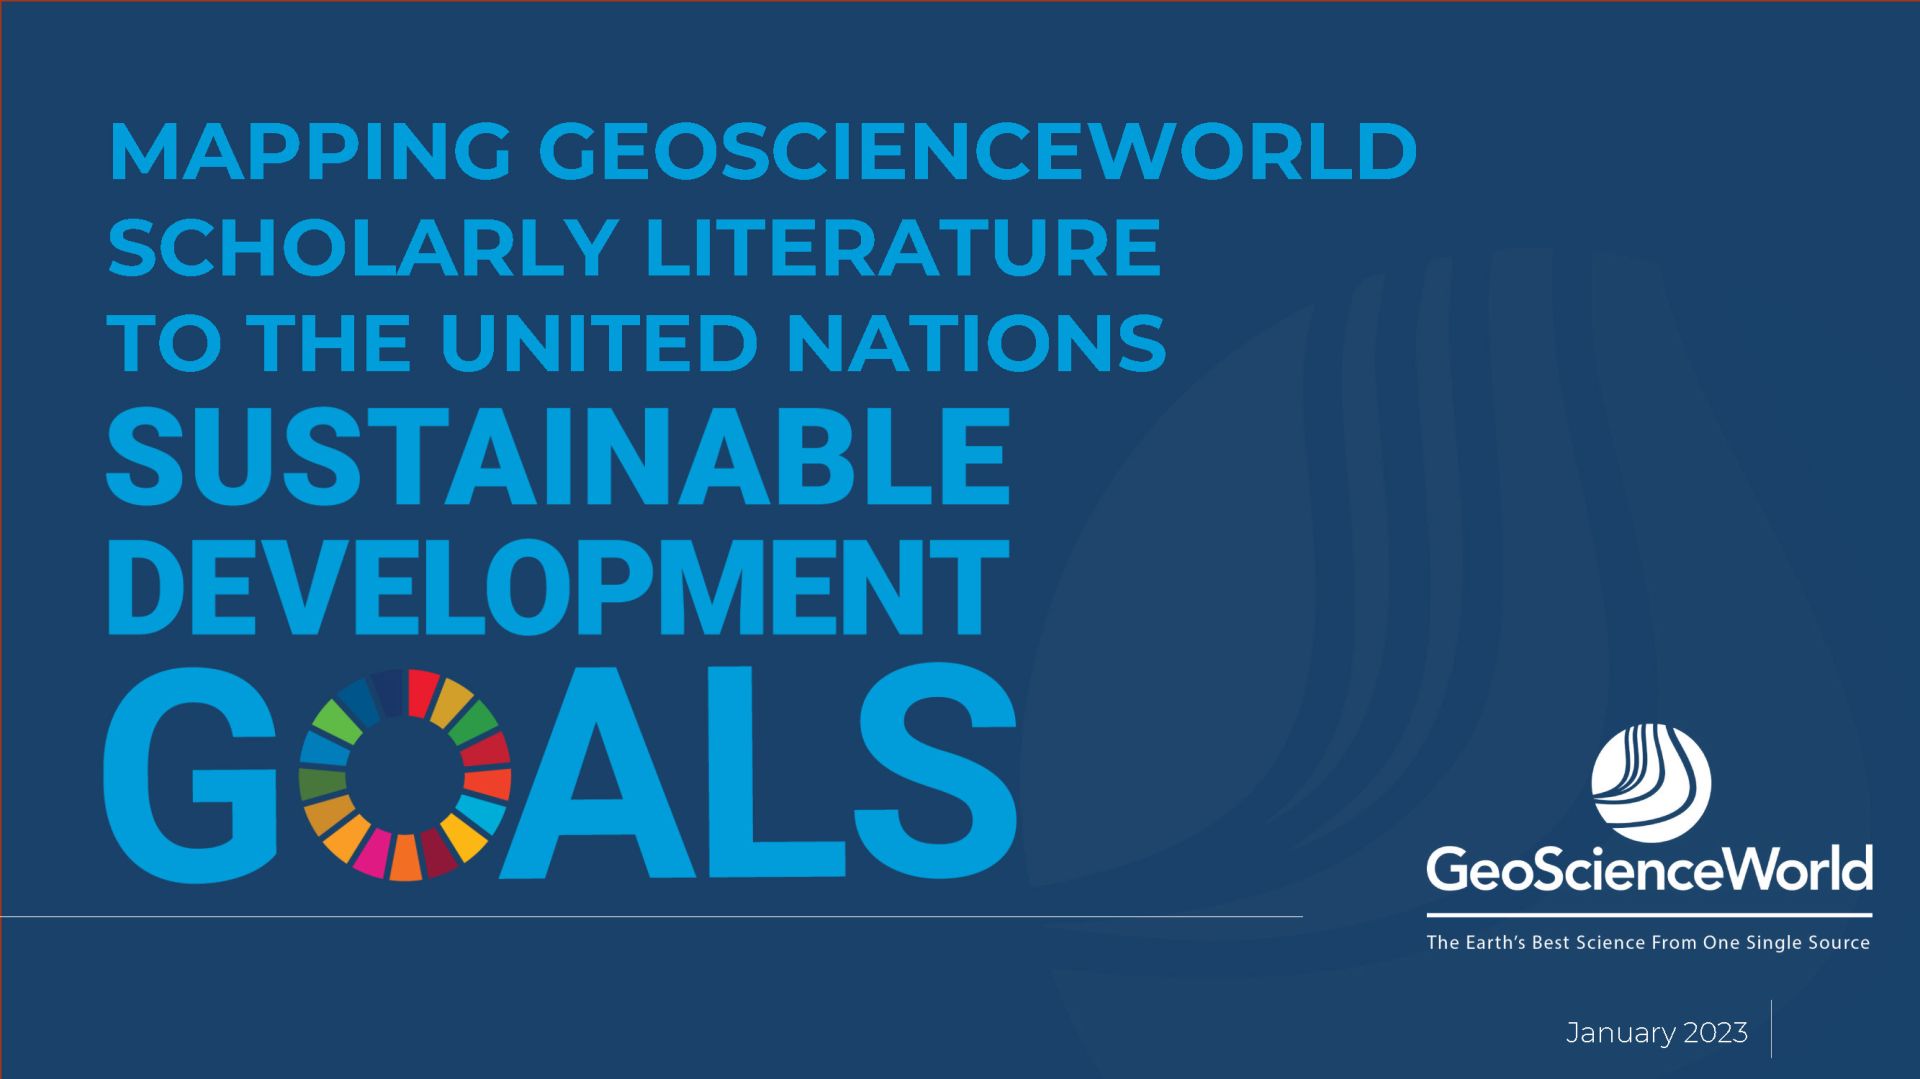 Mapping GeoScienceWorld Scholarly Literature to the UNited Nations Sustainable Development Goals - Risultati dell'Italian Journal of Geosciences